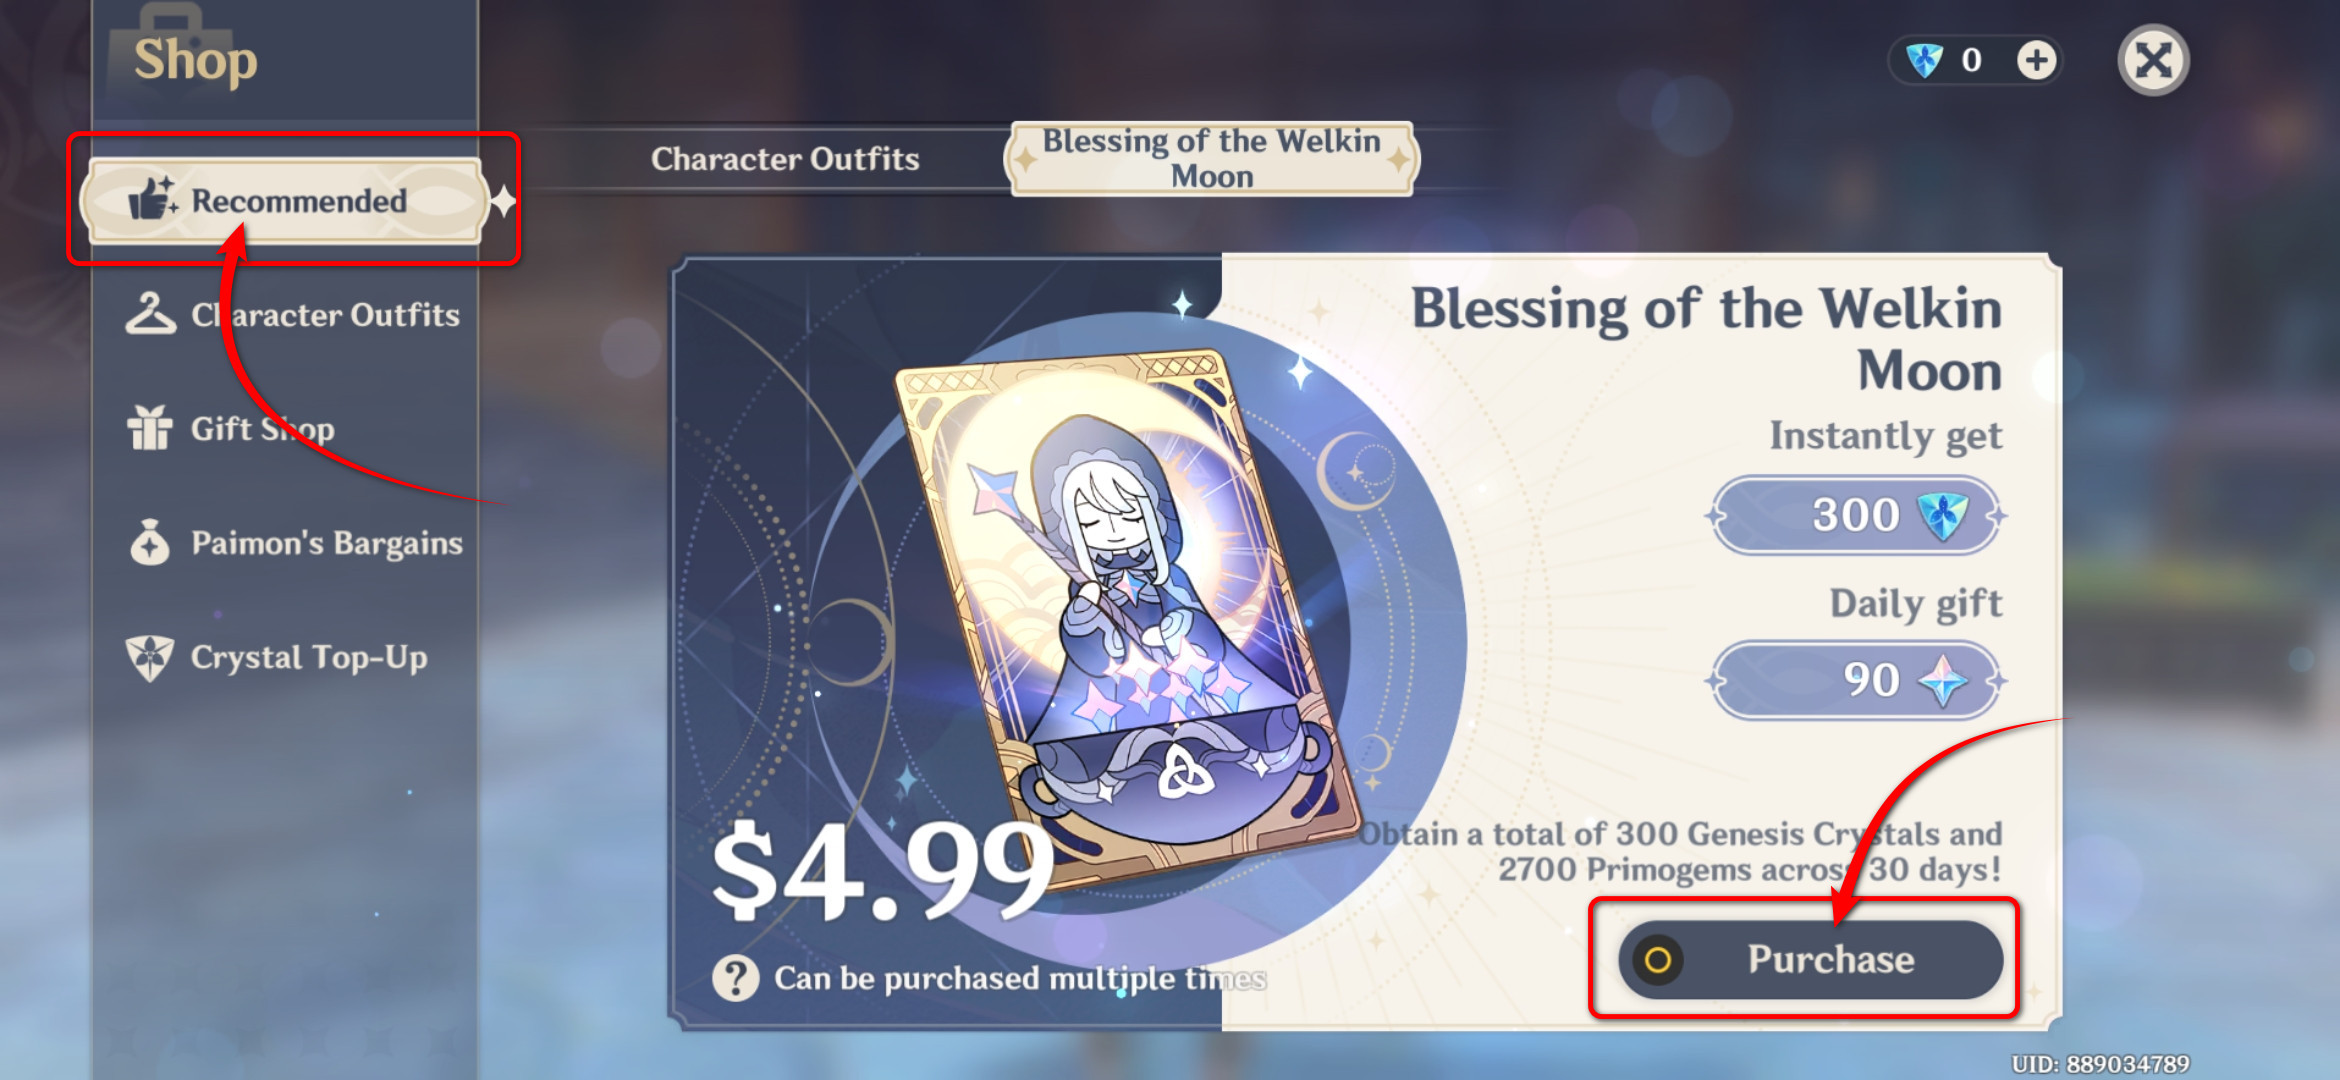 blessing-of-the-welkin-moon